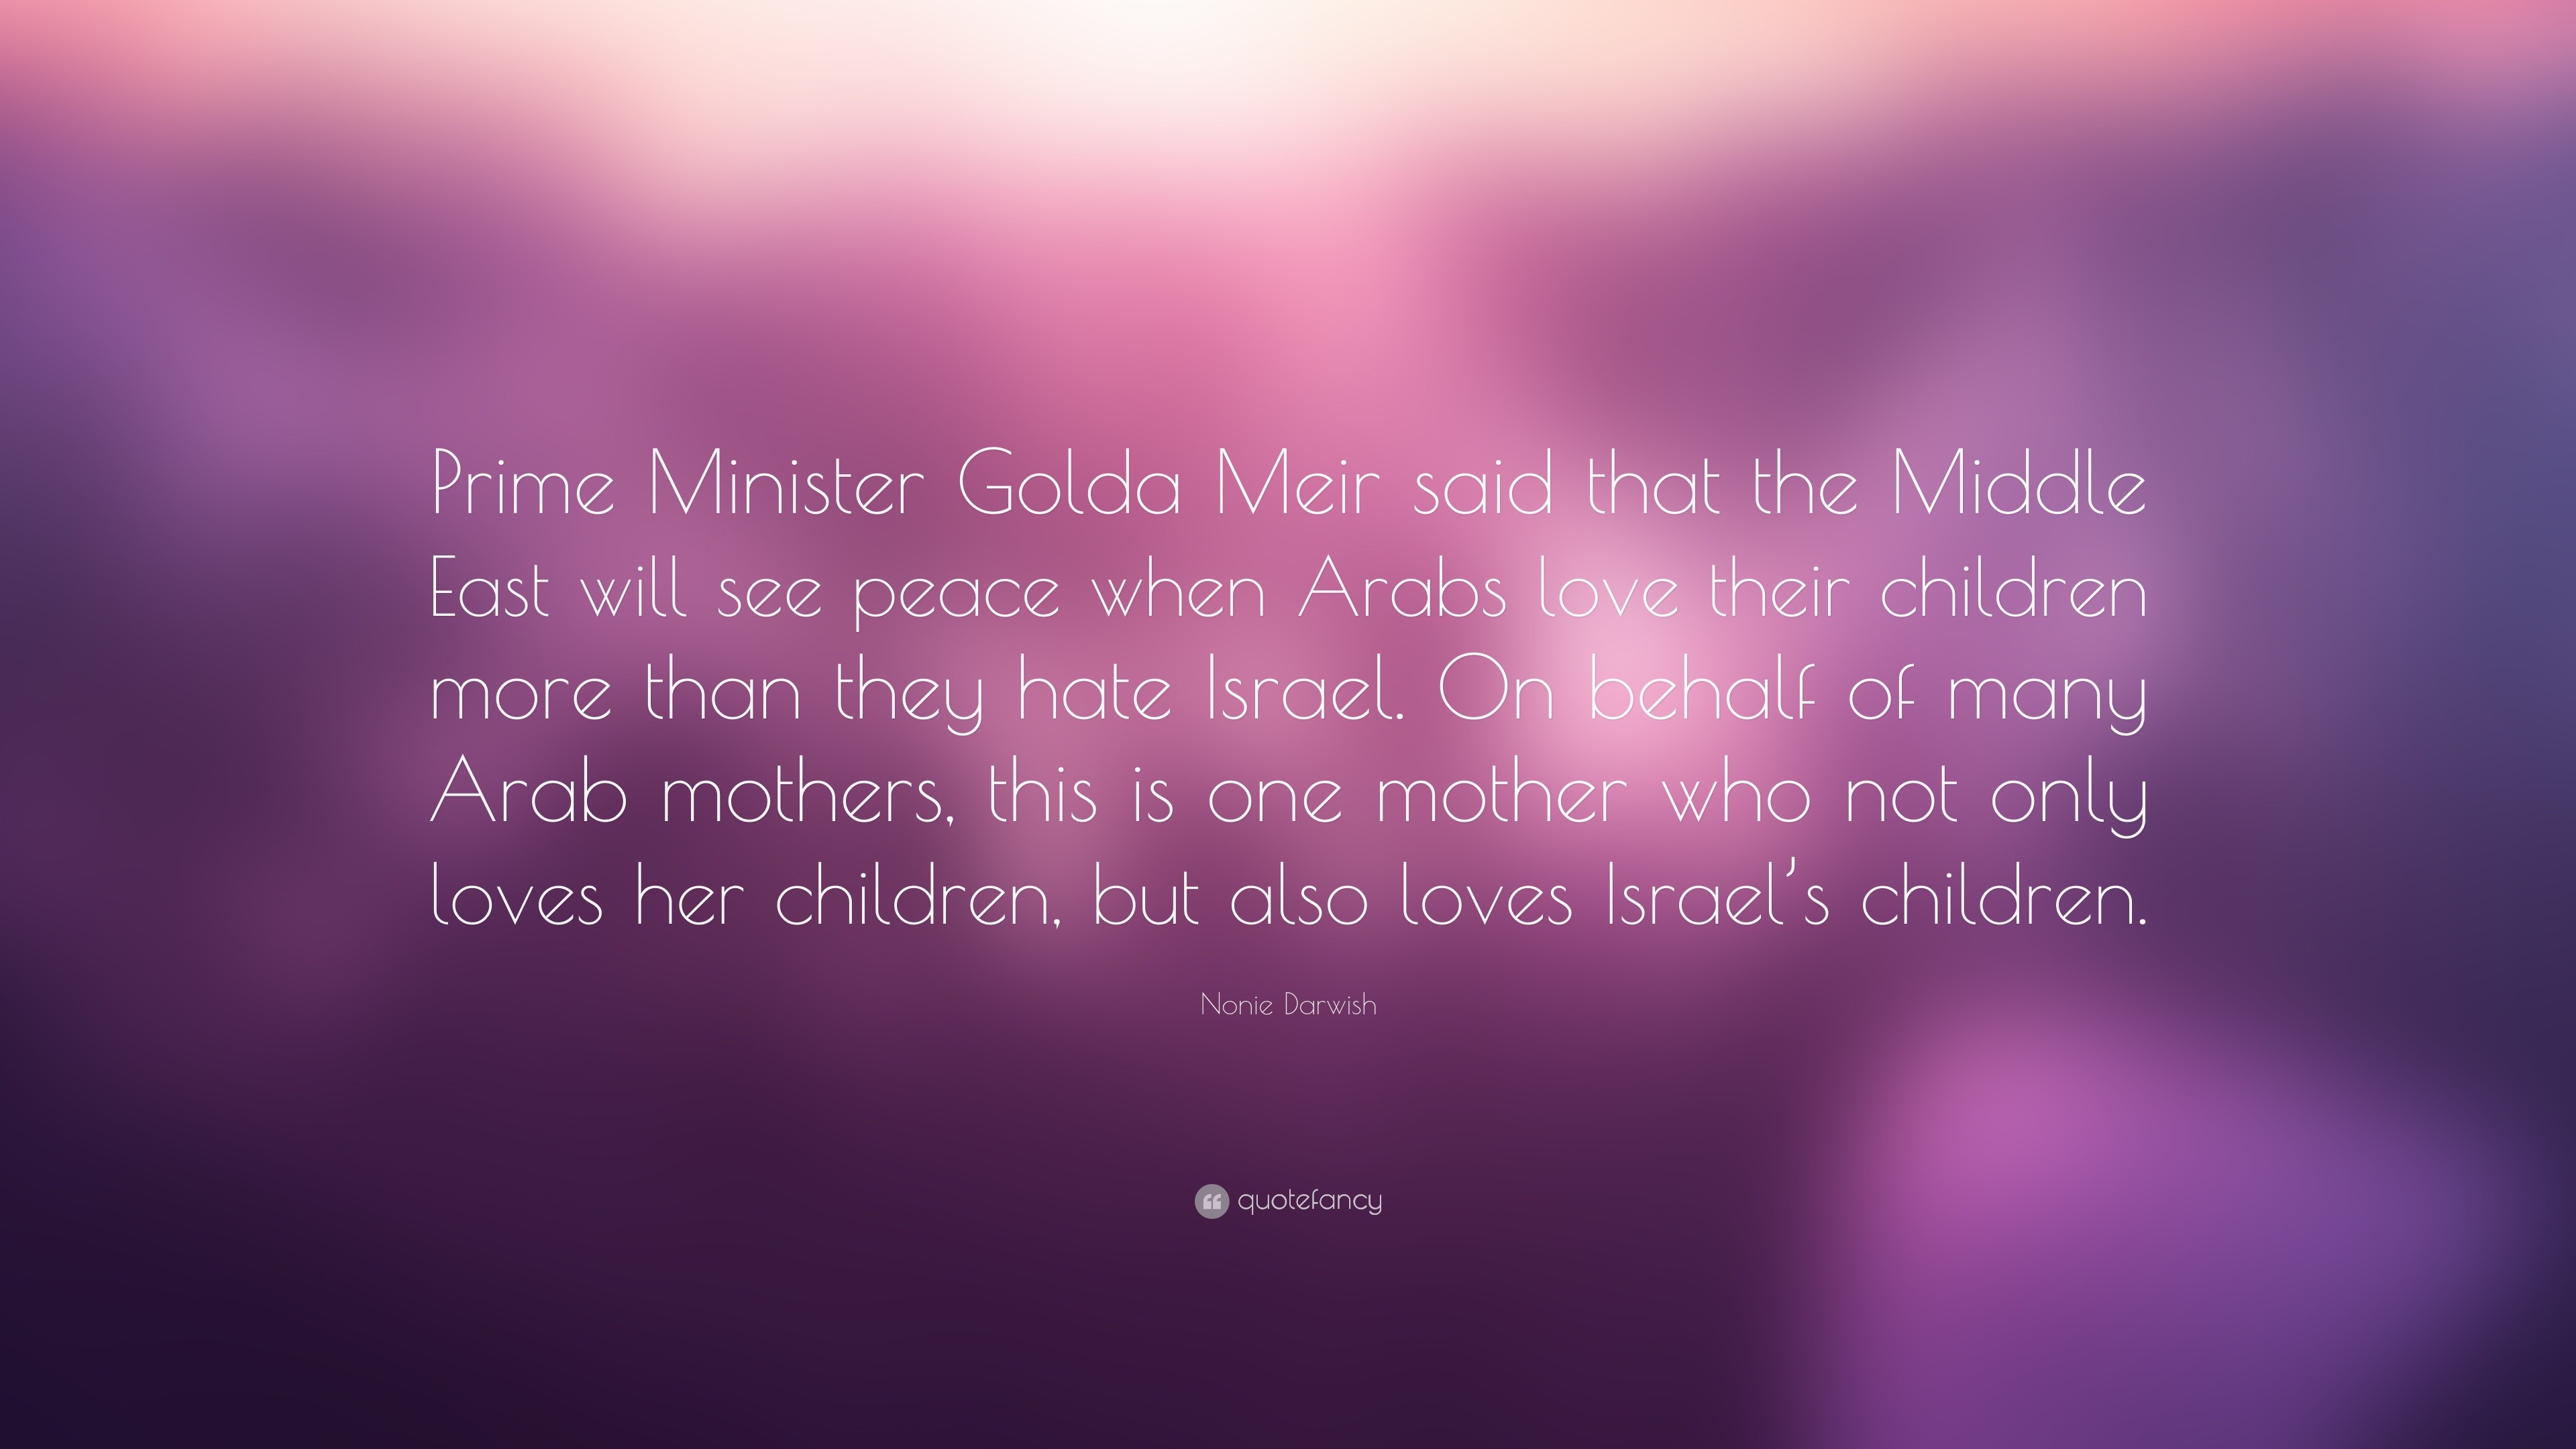 Nonie Darwish Quote “Prime Minister Golda Meir said that the Middle East will see